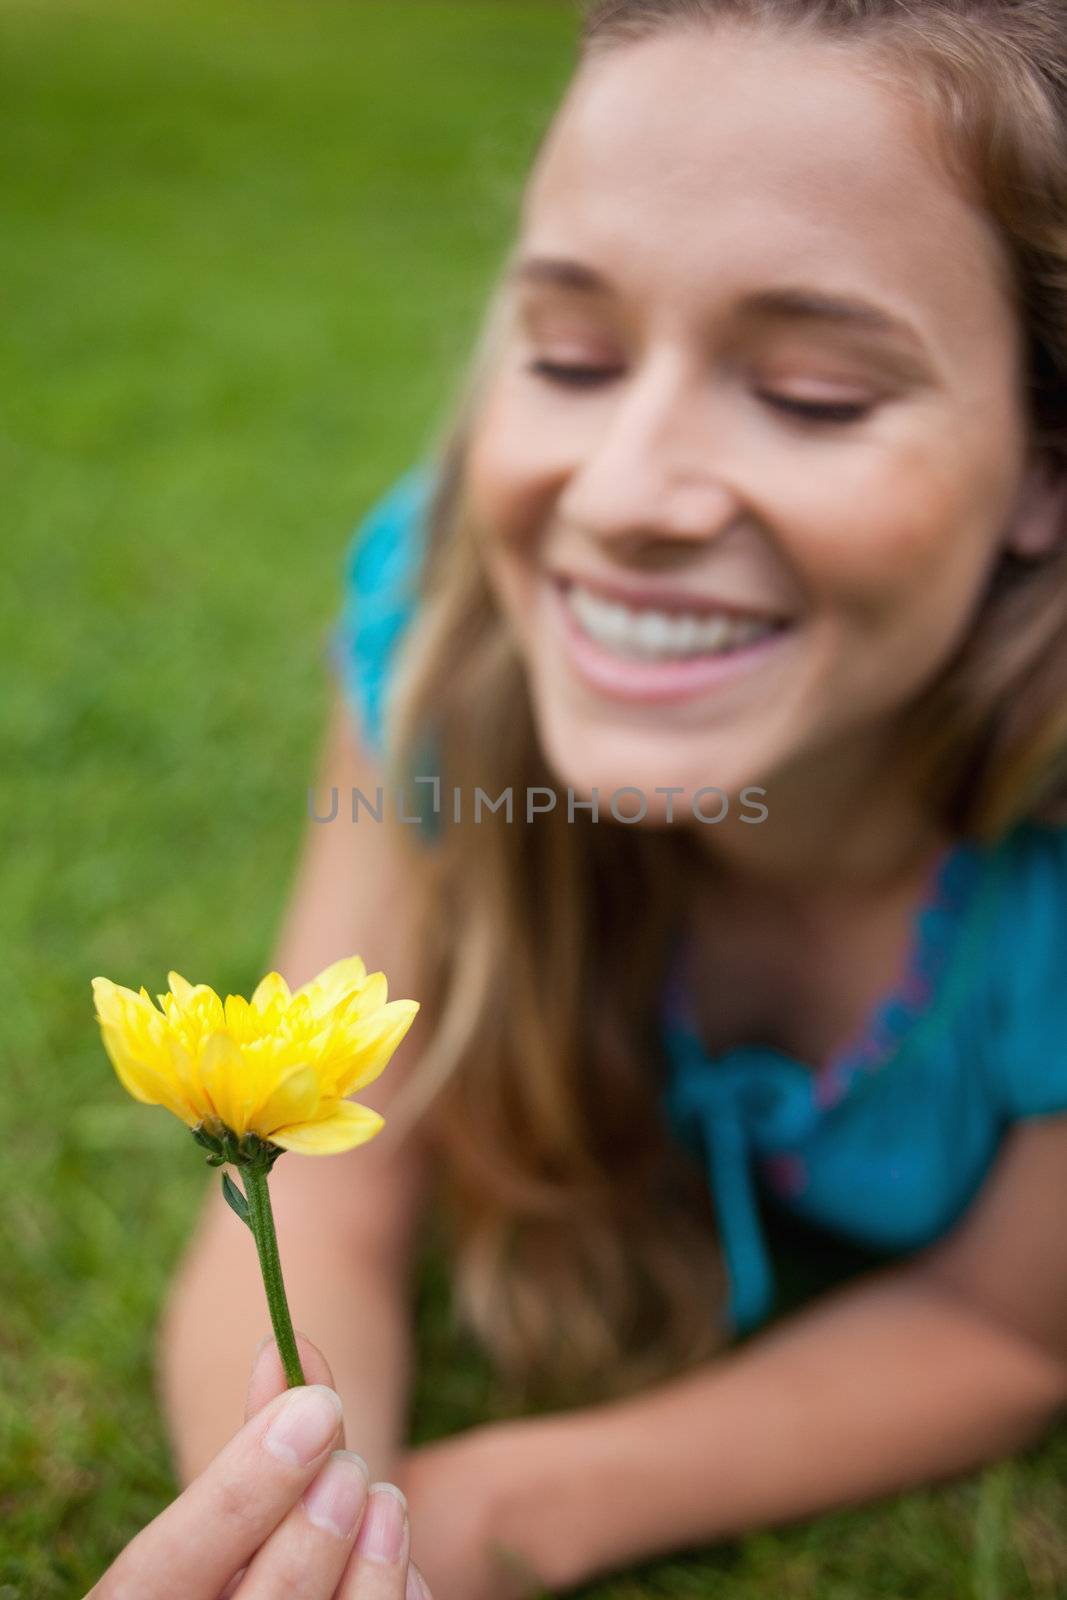 Beautiful yellow flower held by a smiling young woman